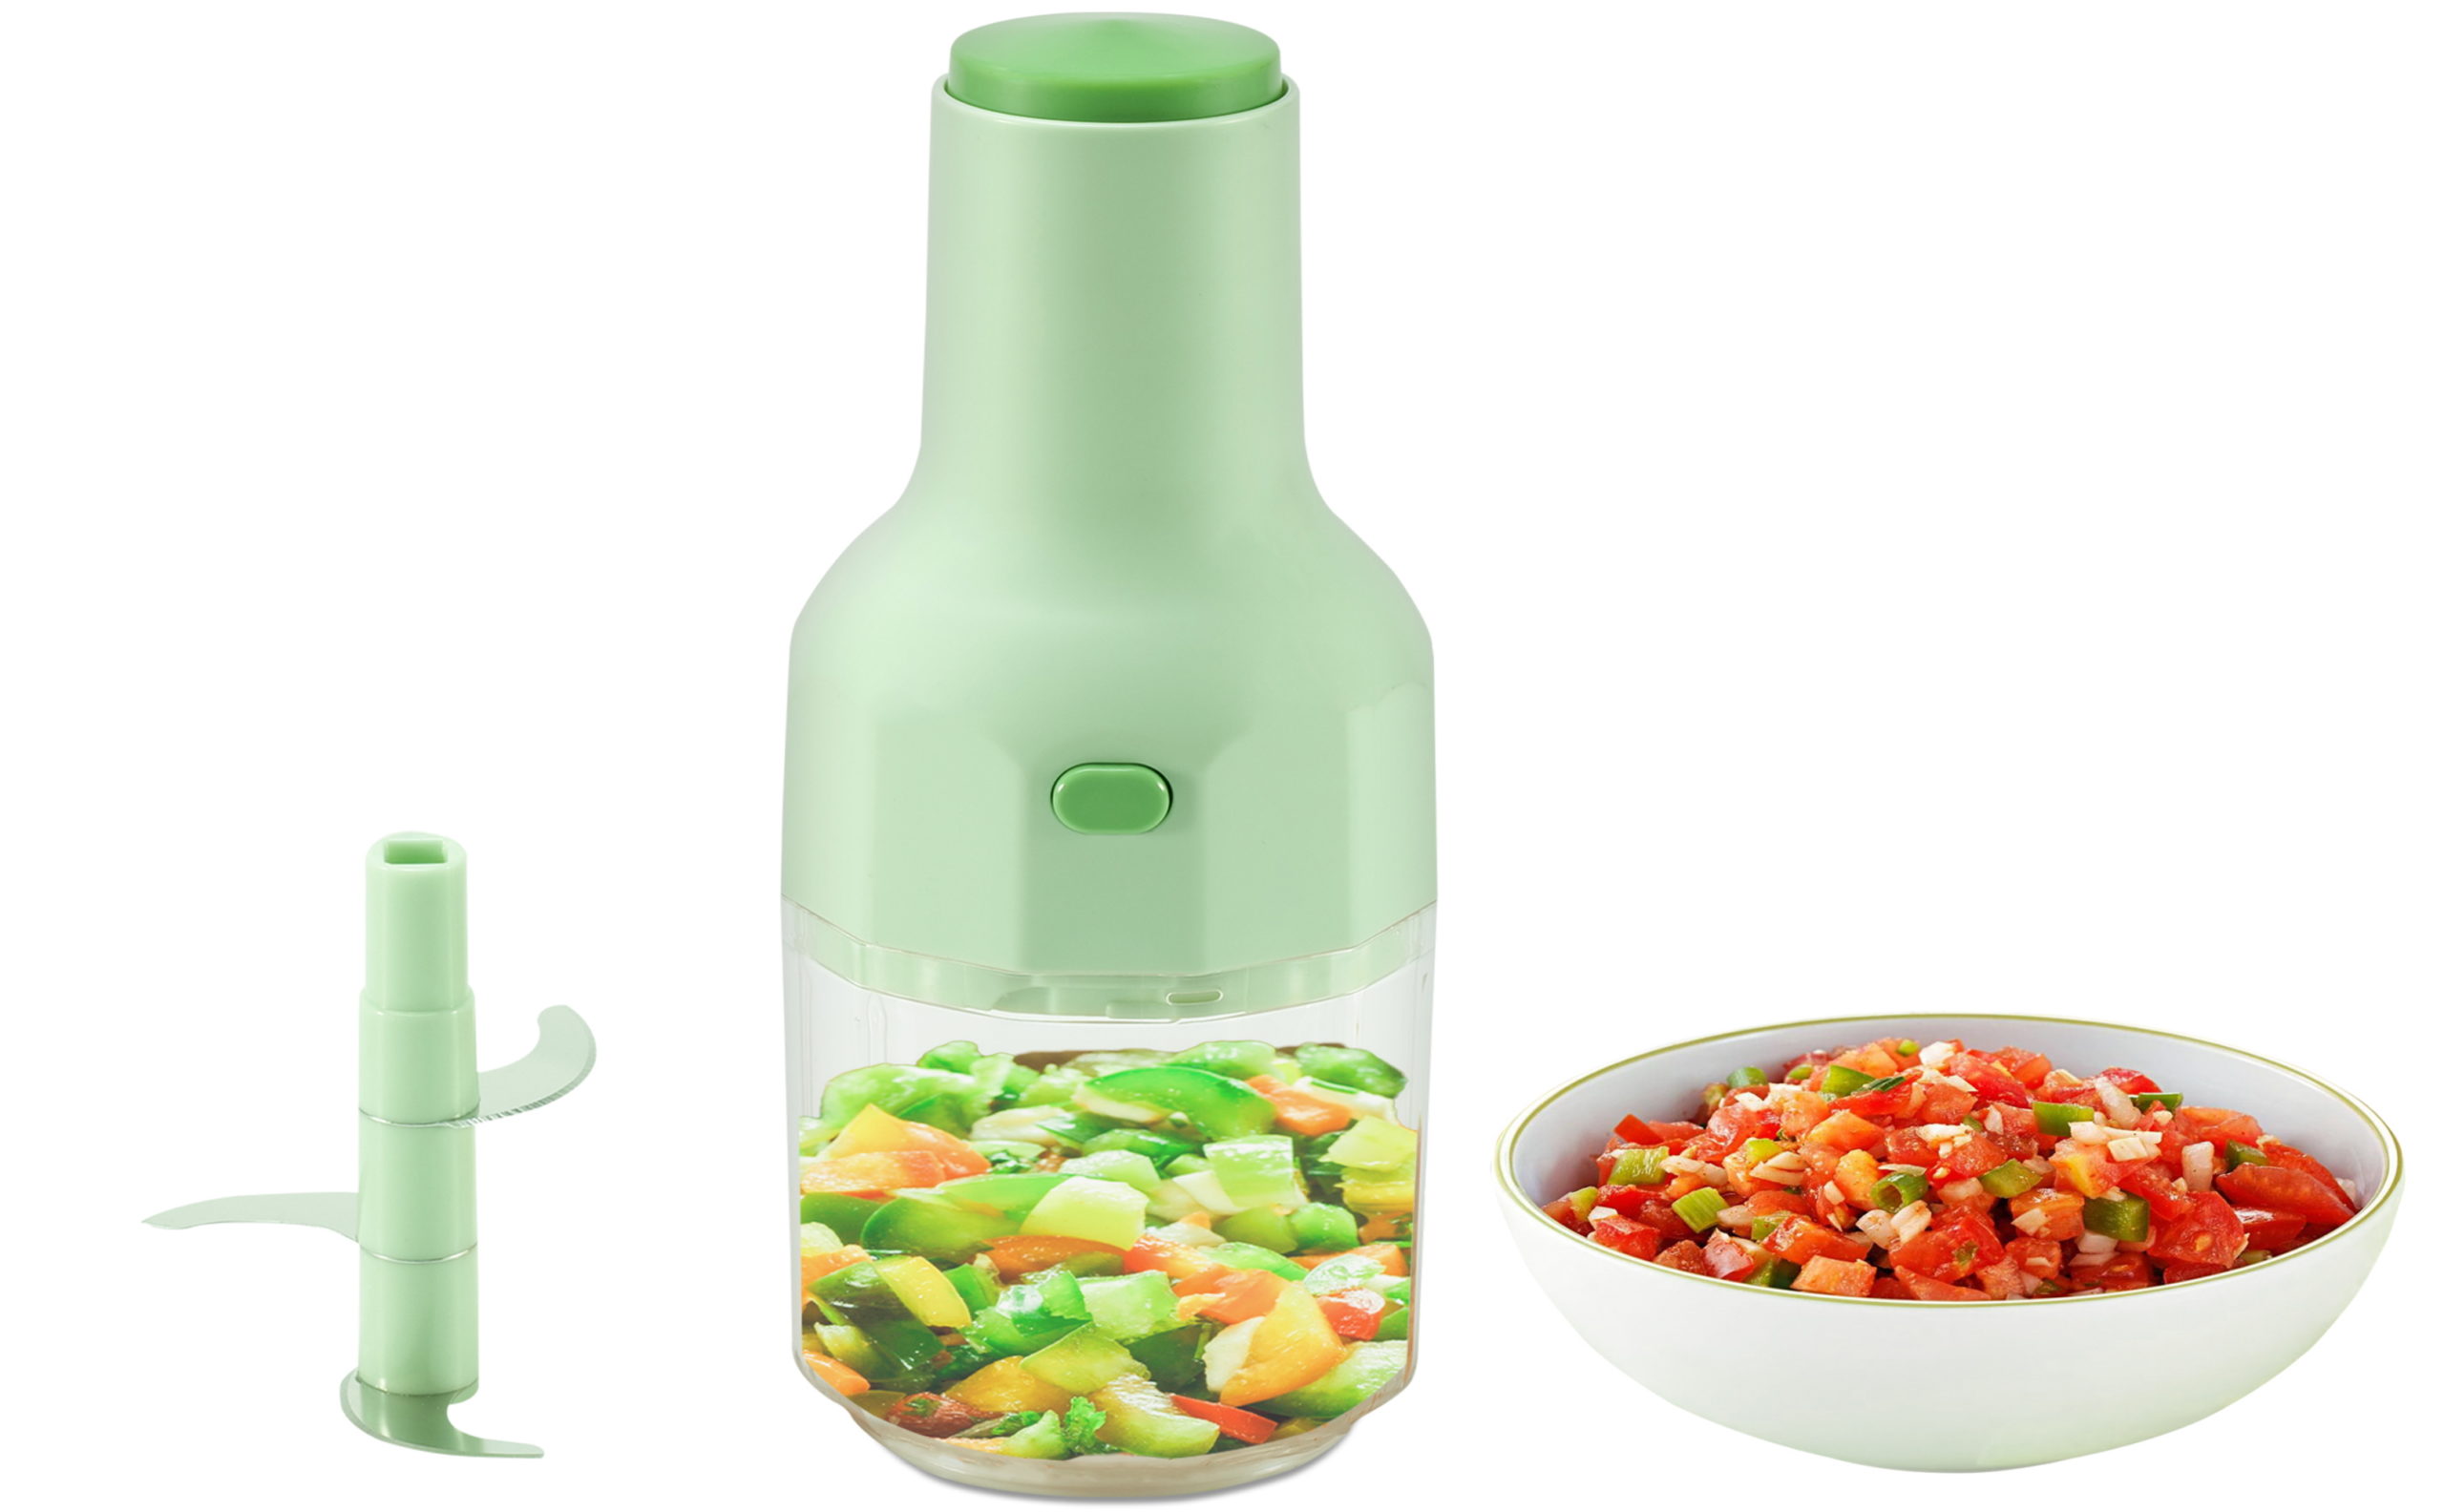 Brieftons QuickPush food chopper (BR-QP-02): Replacement pusher